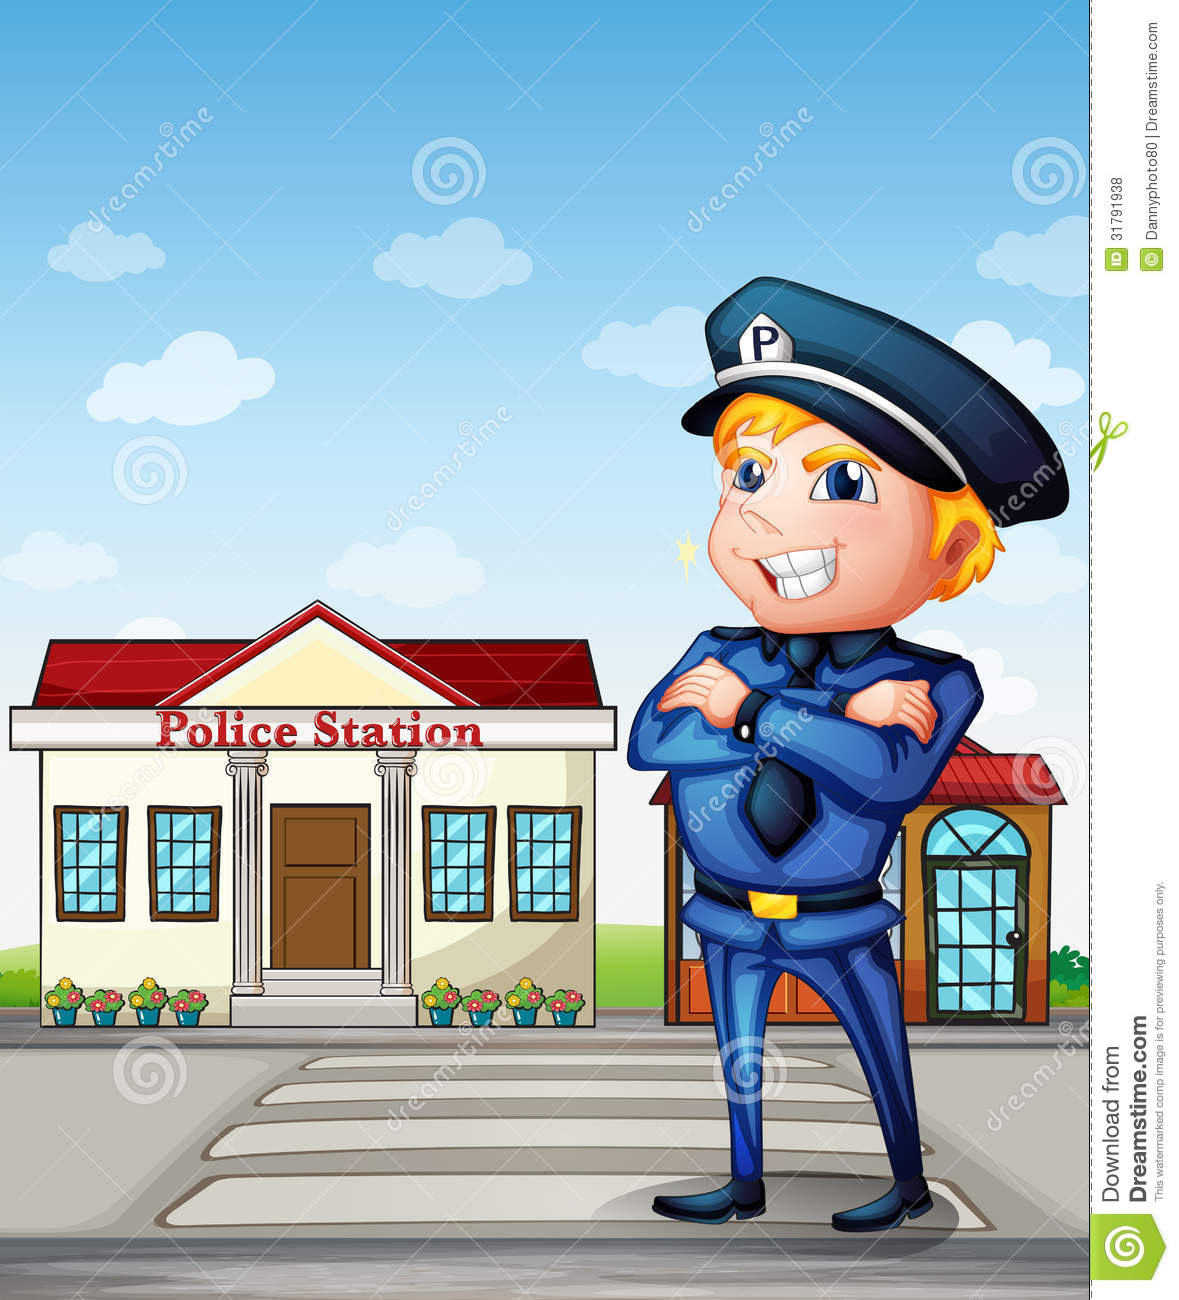 Policeman Across The Police Station Royalty Free Stock Photos